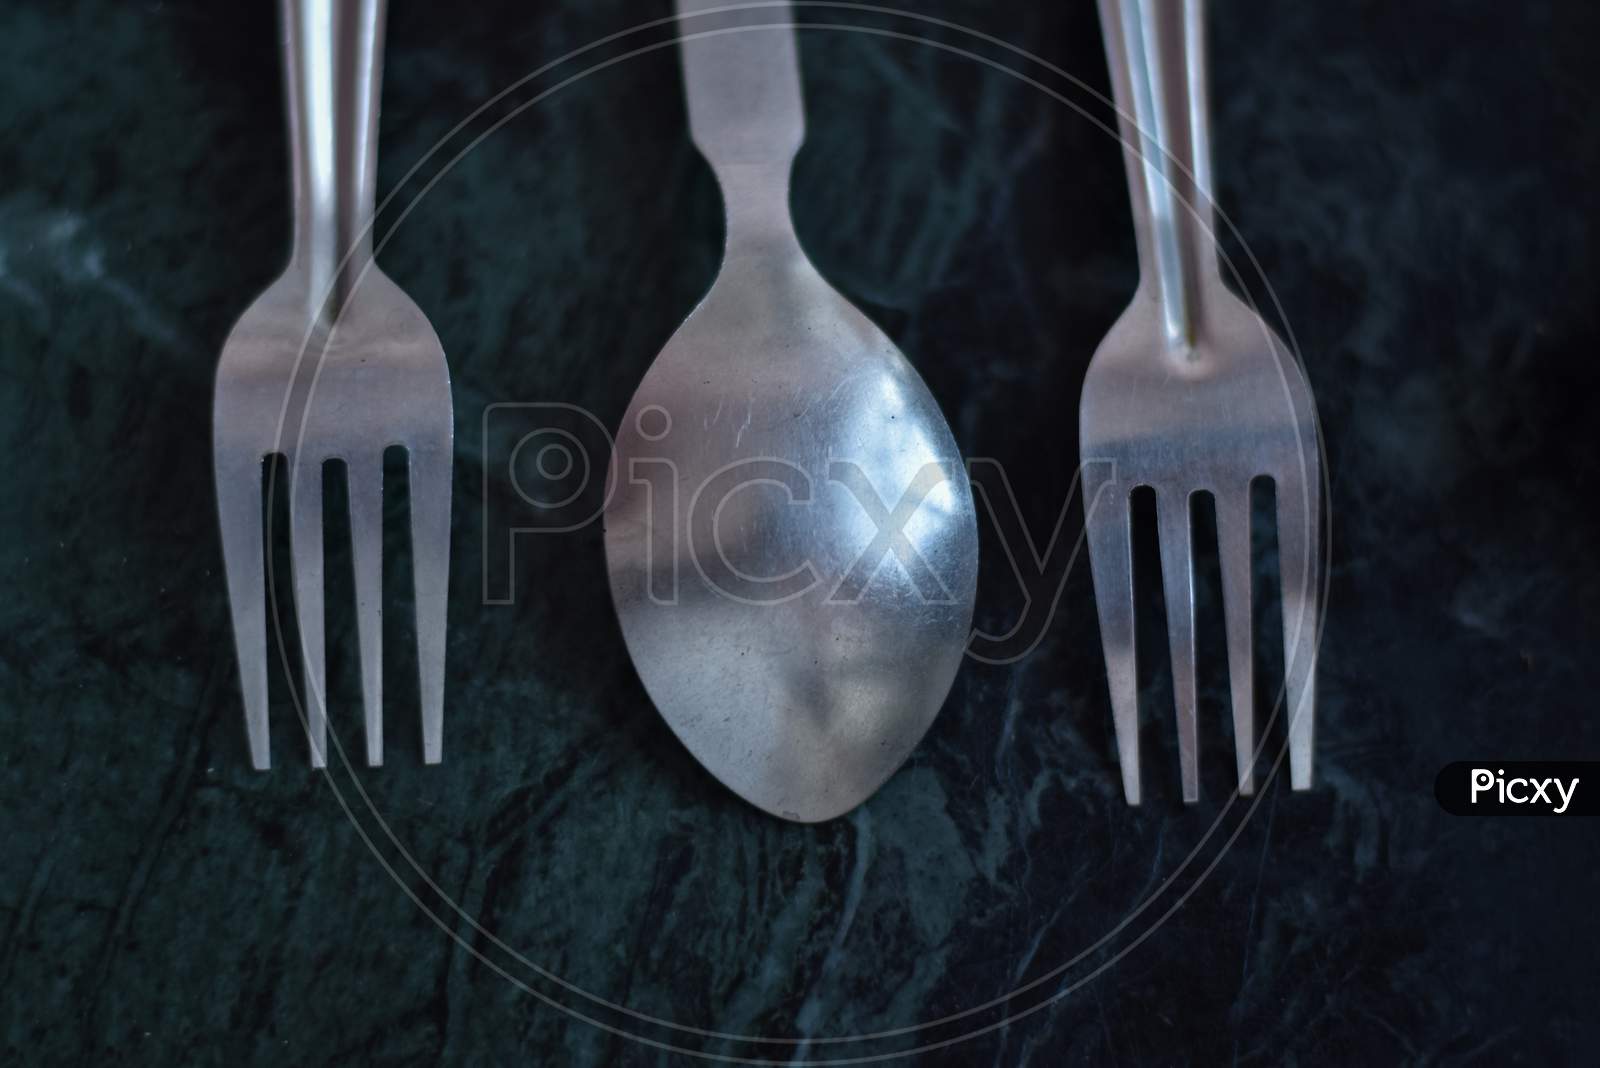 cutlery or spoon and fork over a black marble